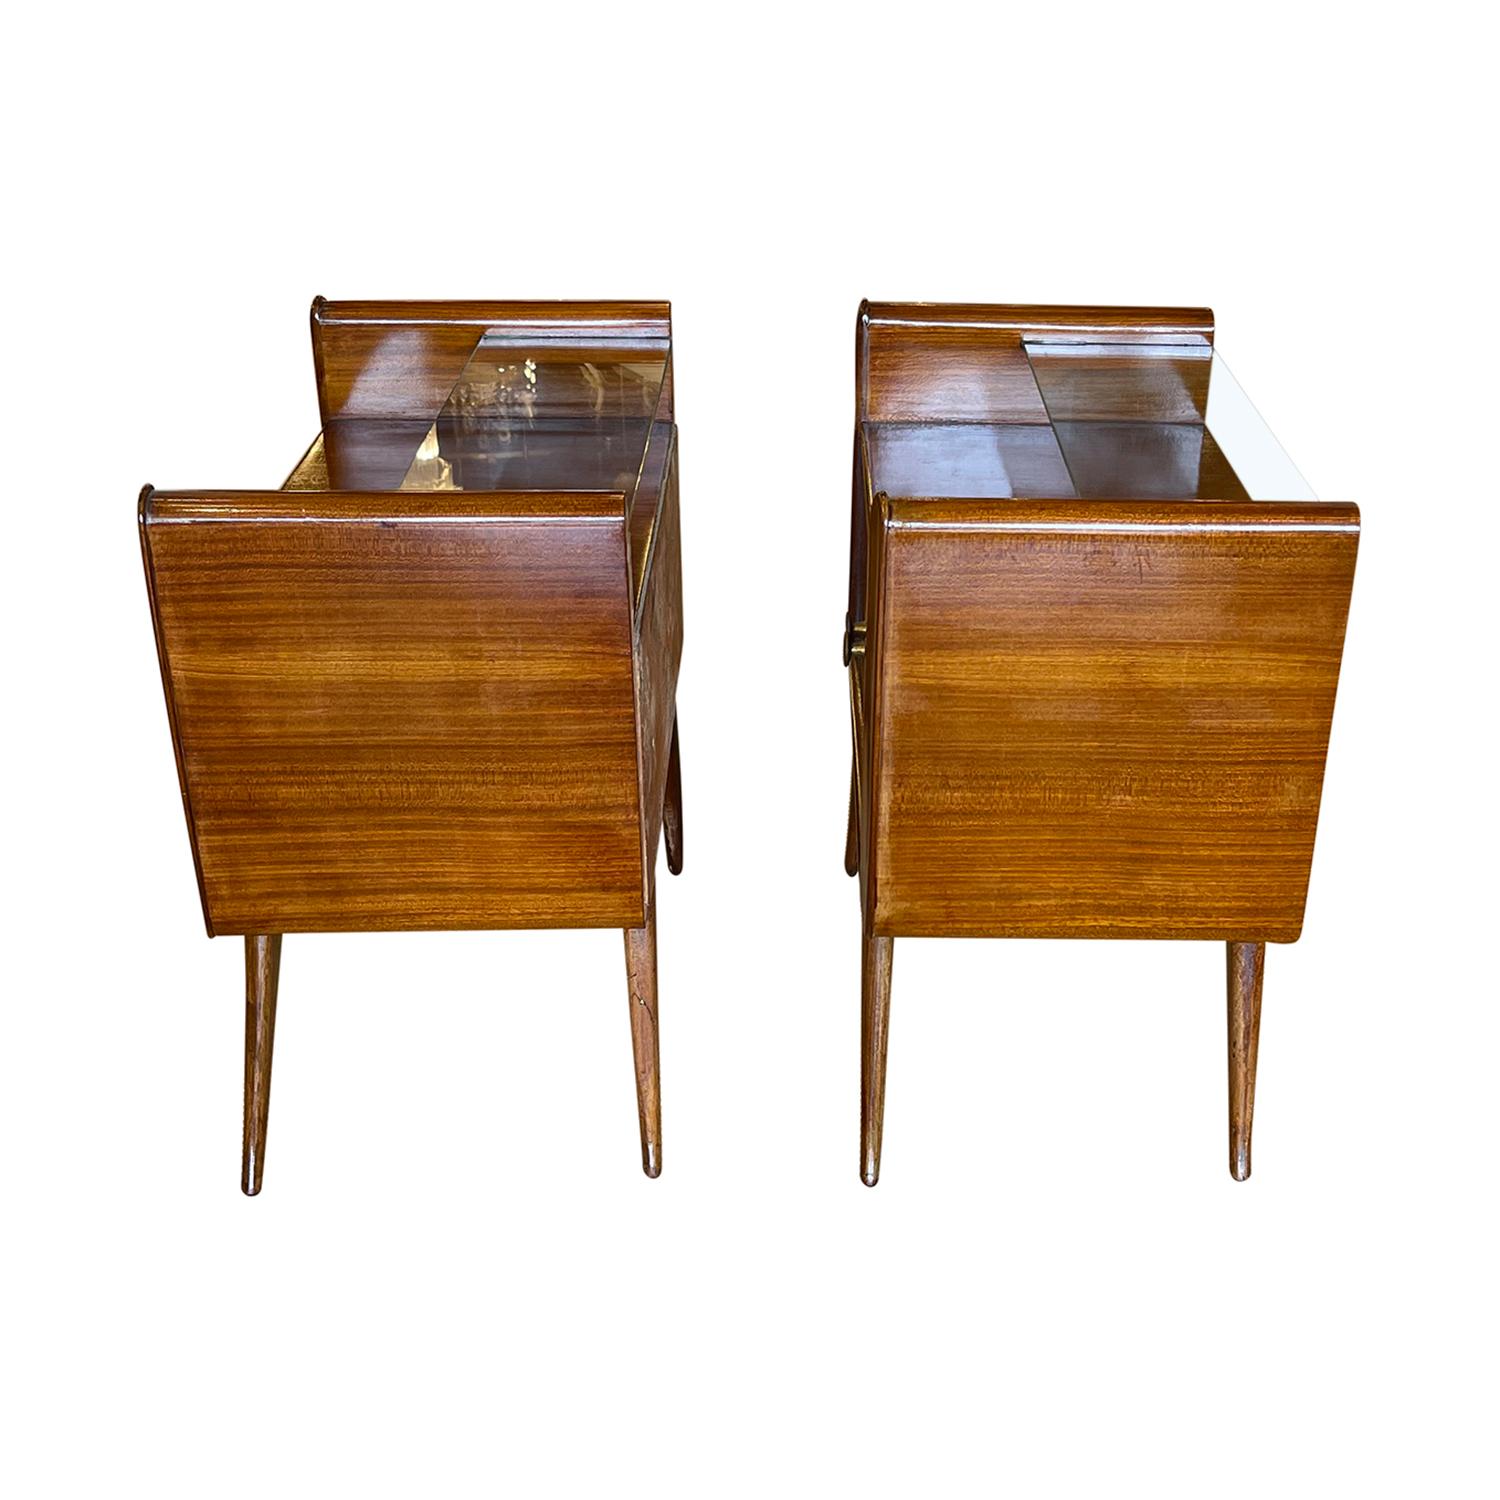 20th Century Italian Pair of Walnut Nightstands, Bedside Tables by Paolo Buffa 1